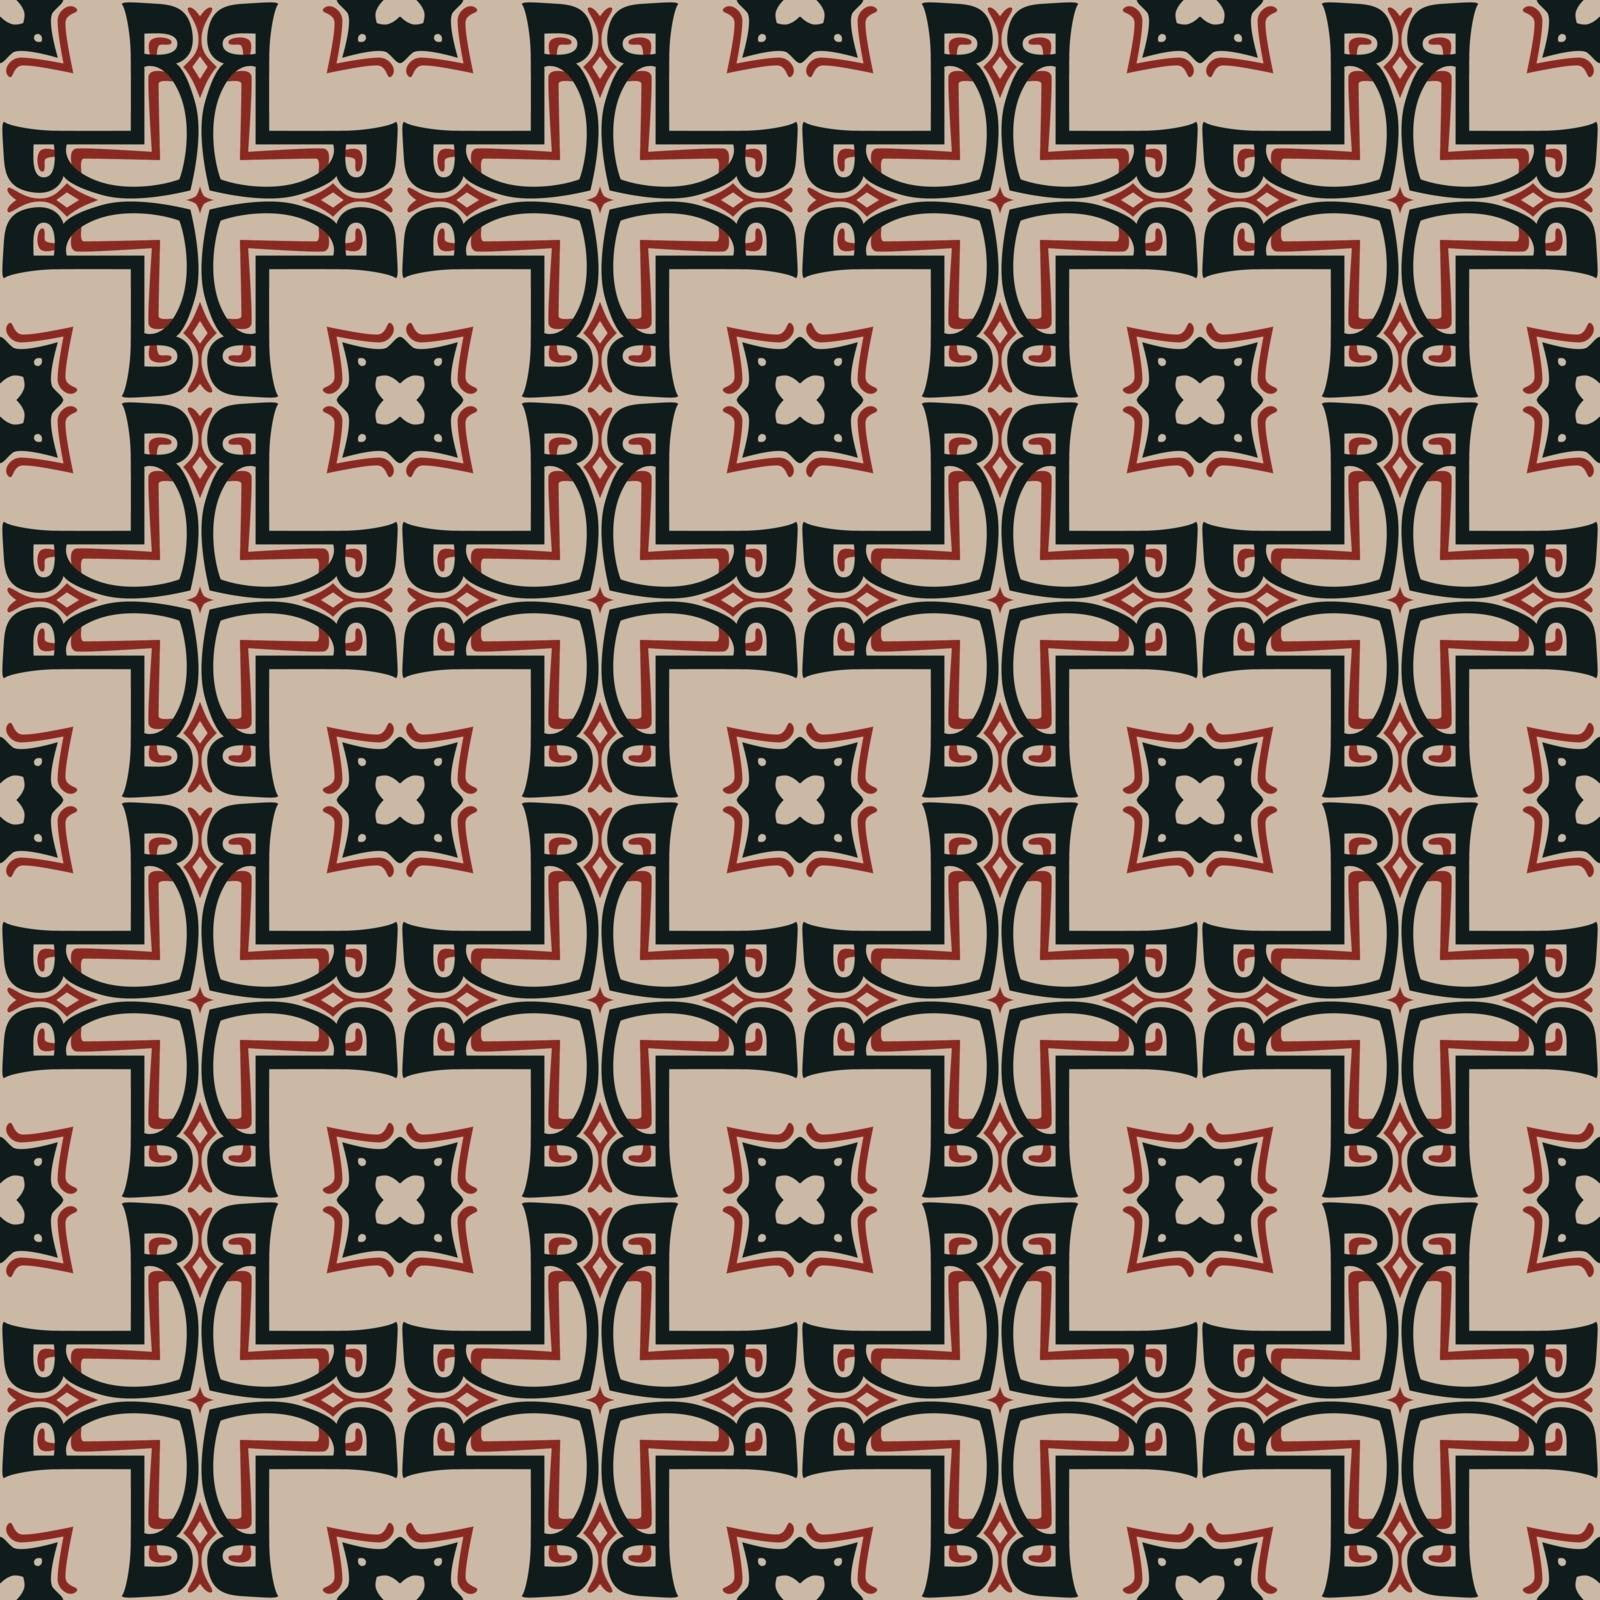 Seamless illustrated pattern made of abstract elements in beige, red and black